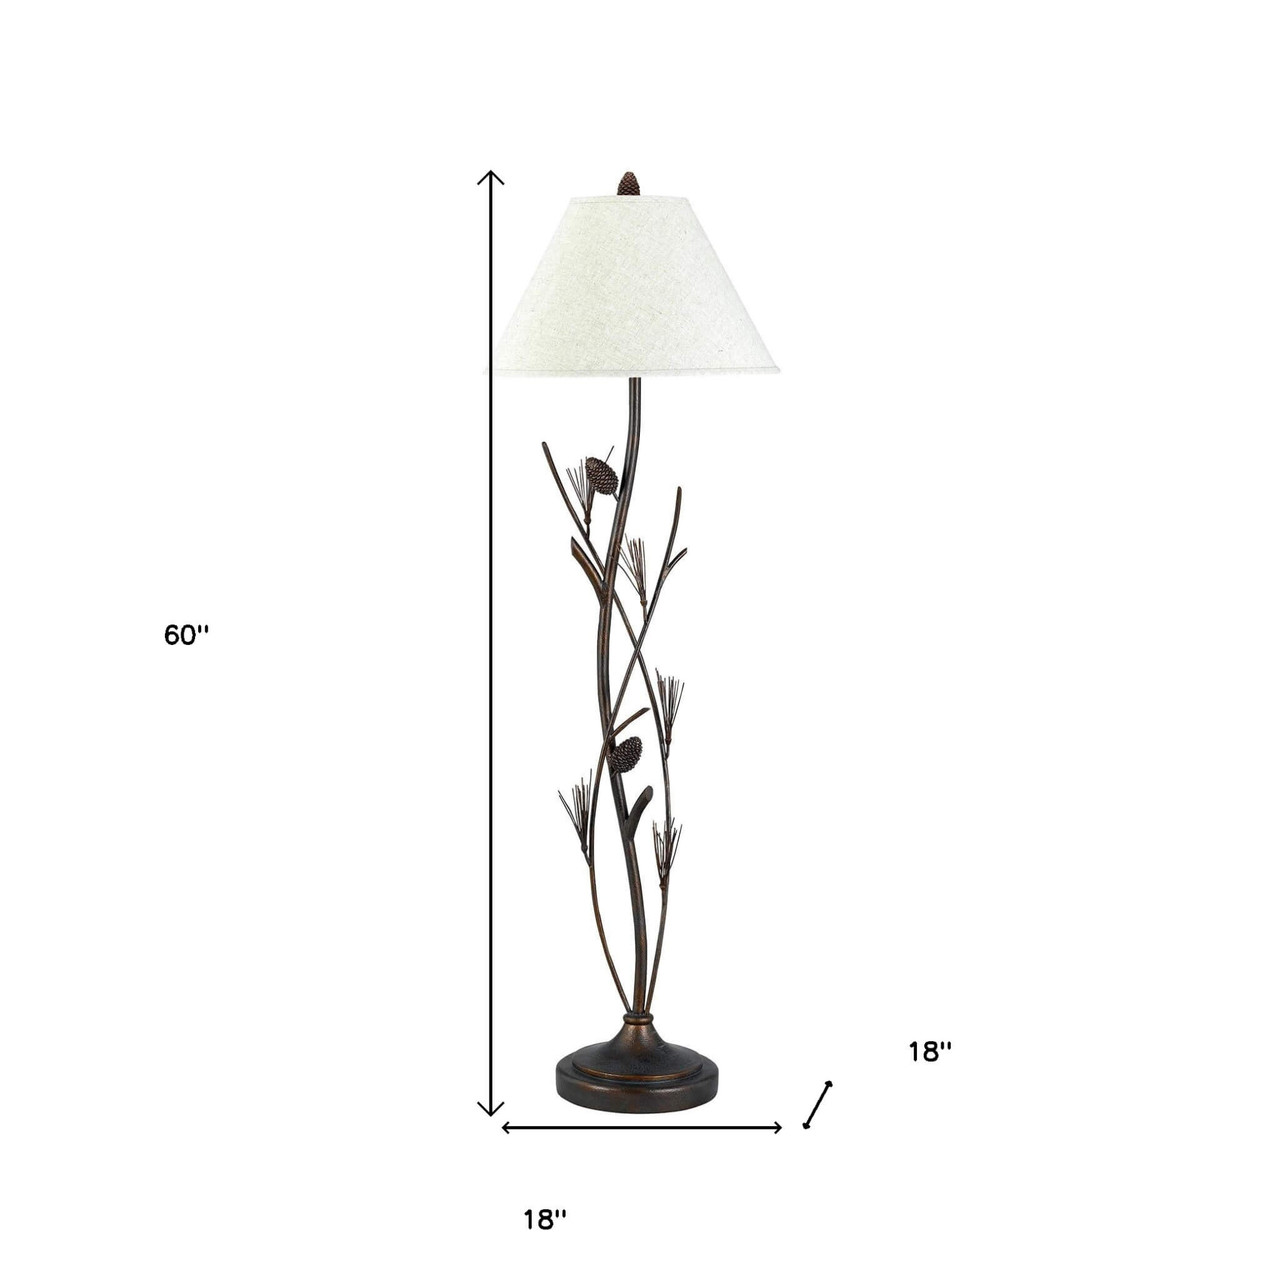 60" Rusted Traditional Shaped Floor Lamp With Brown Empire Shade - Chicken Pieces